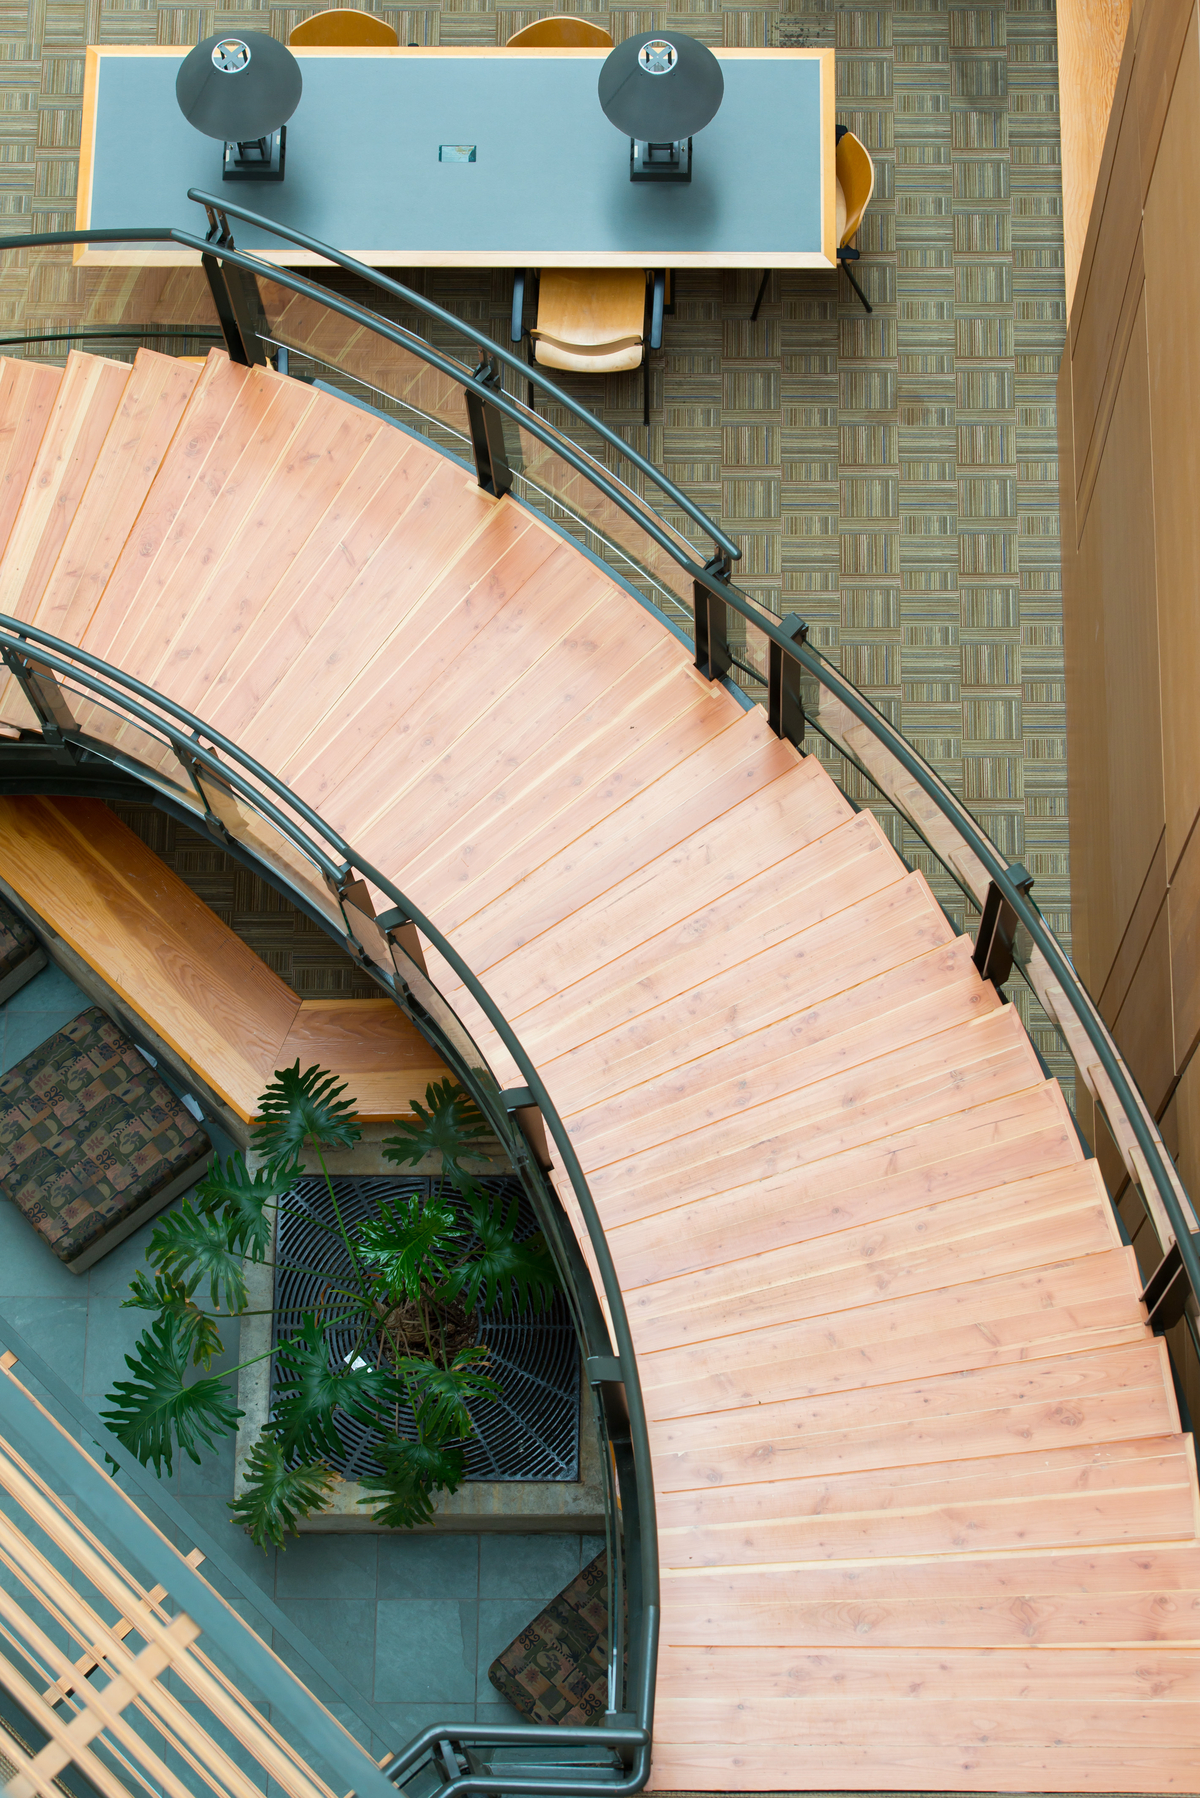 A large diameter circular stairwell with beautiful wood treads is shown in this downward view of the UBC Forest Sciences Centre main atrium